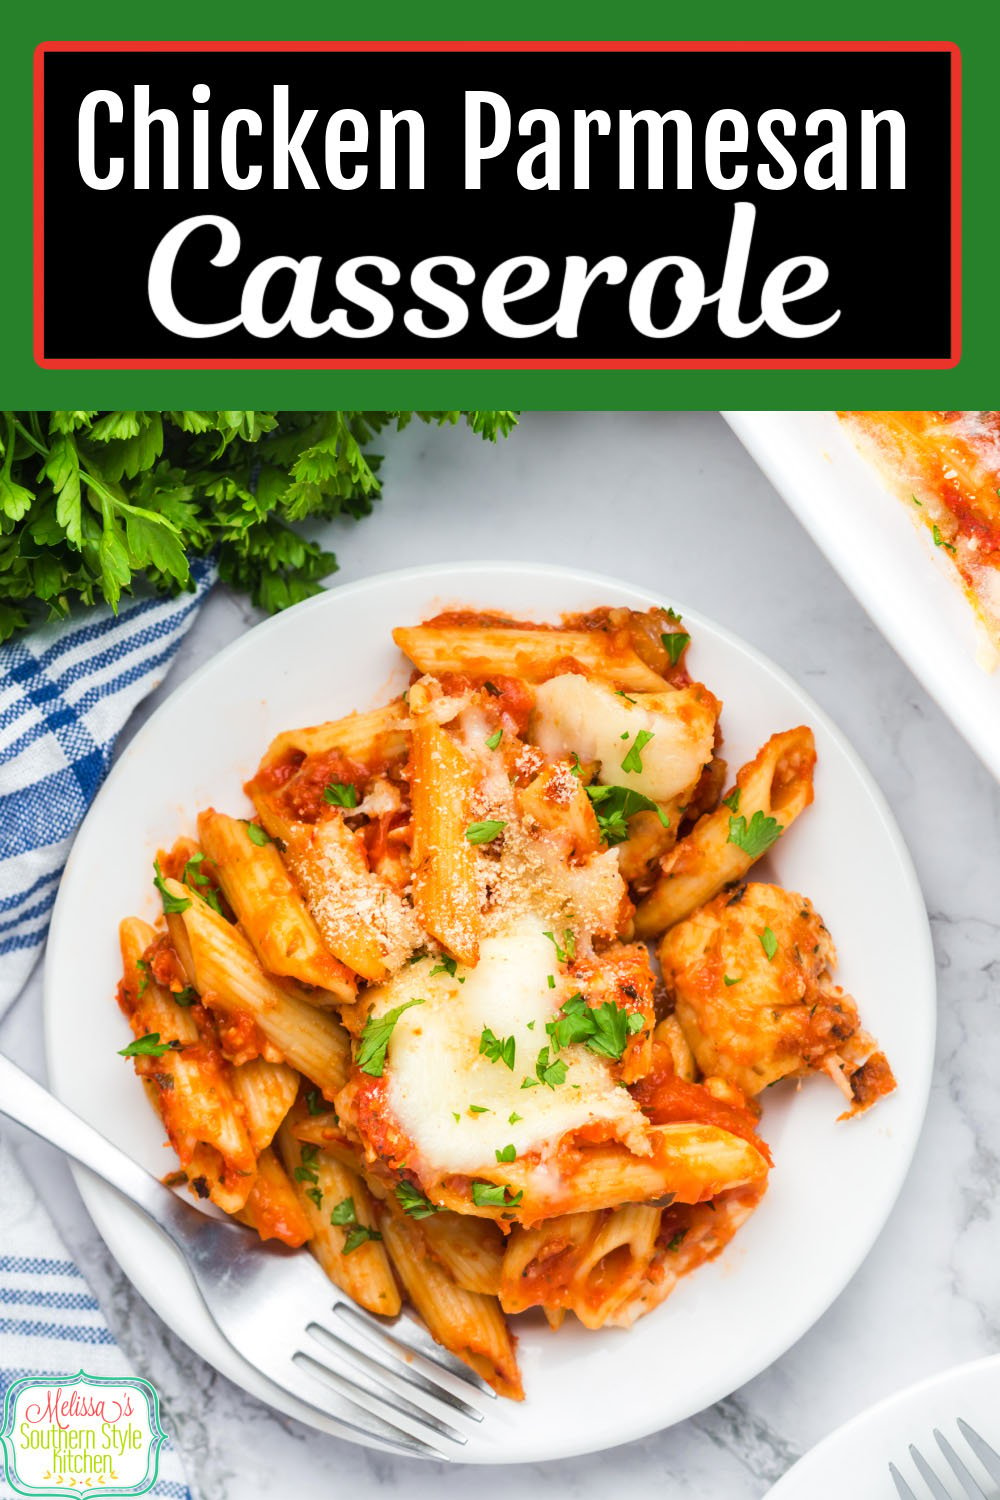 Add this Chicken Parmesan Casserole to your dinner menu and enjoy Italian night at home. #chickenrecipes #chickencasserole #chickenparmesan #parmesanchicken #casseroles #easychickenrecipes #pasta via @melissasssk